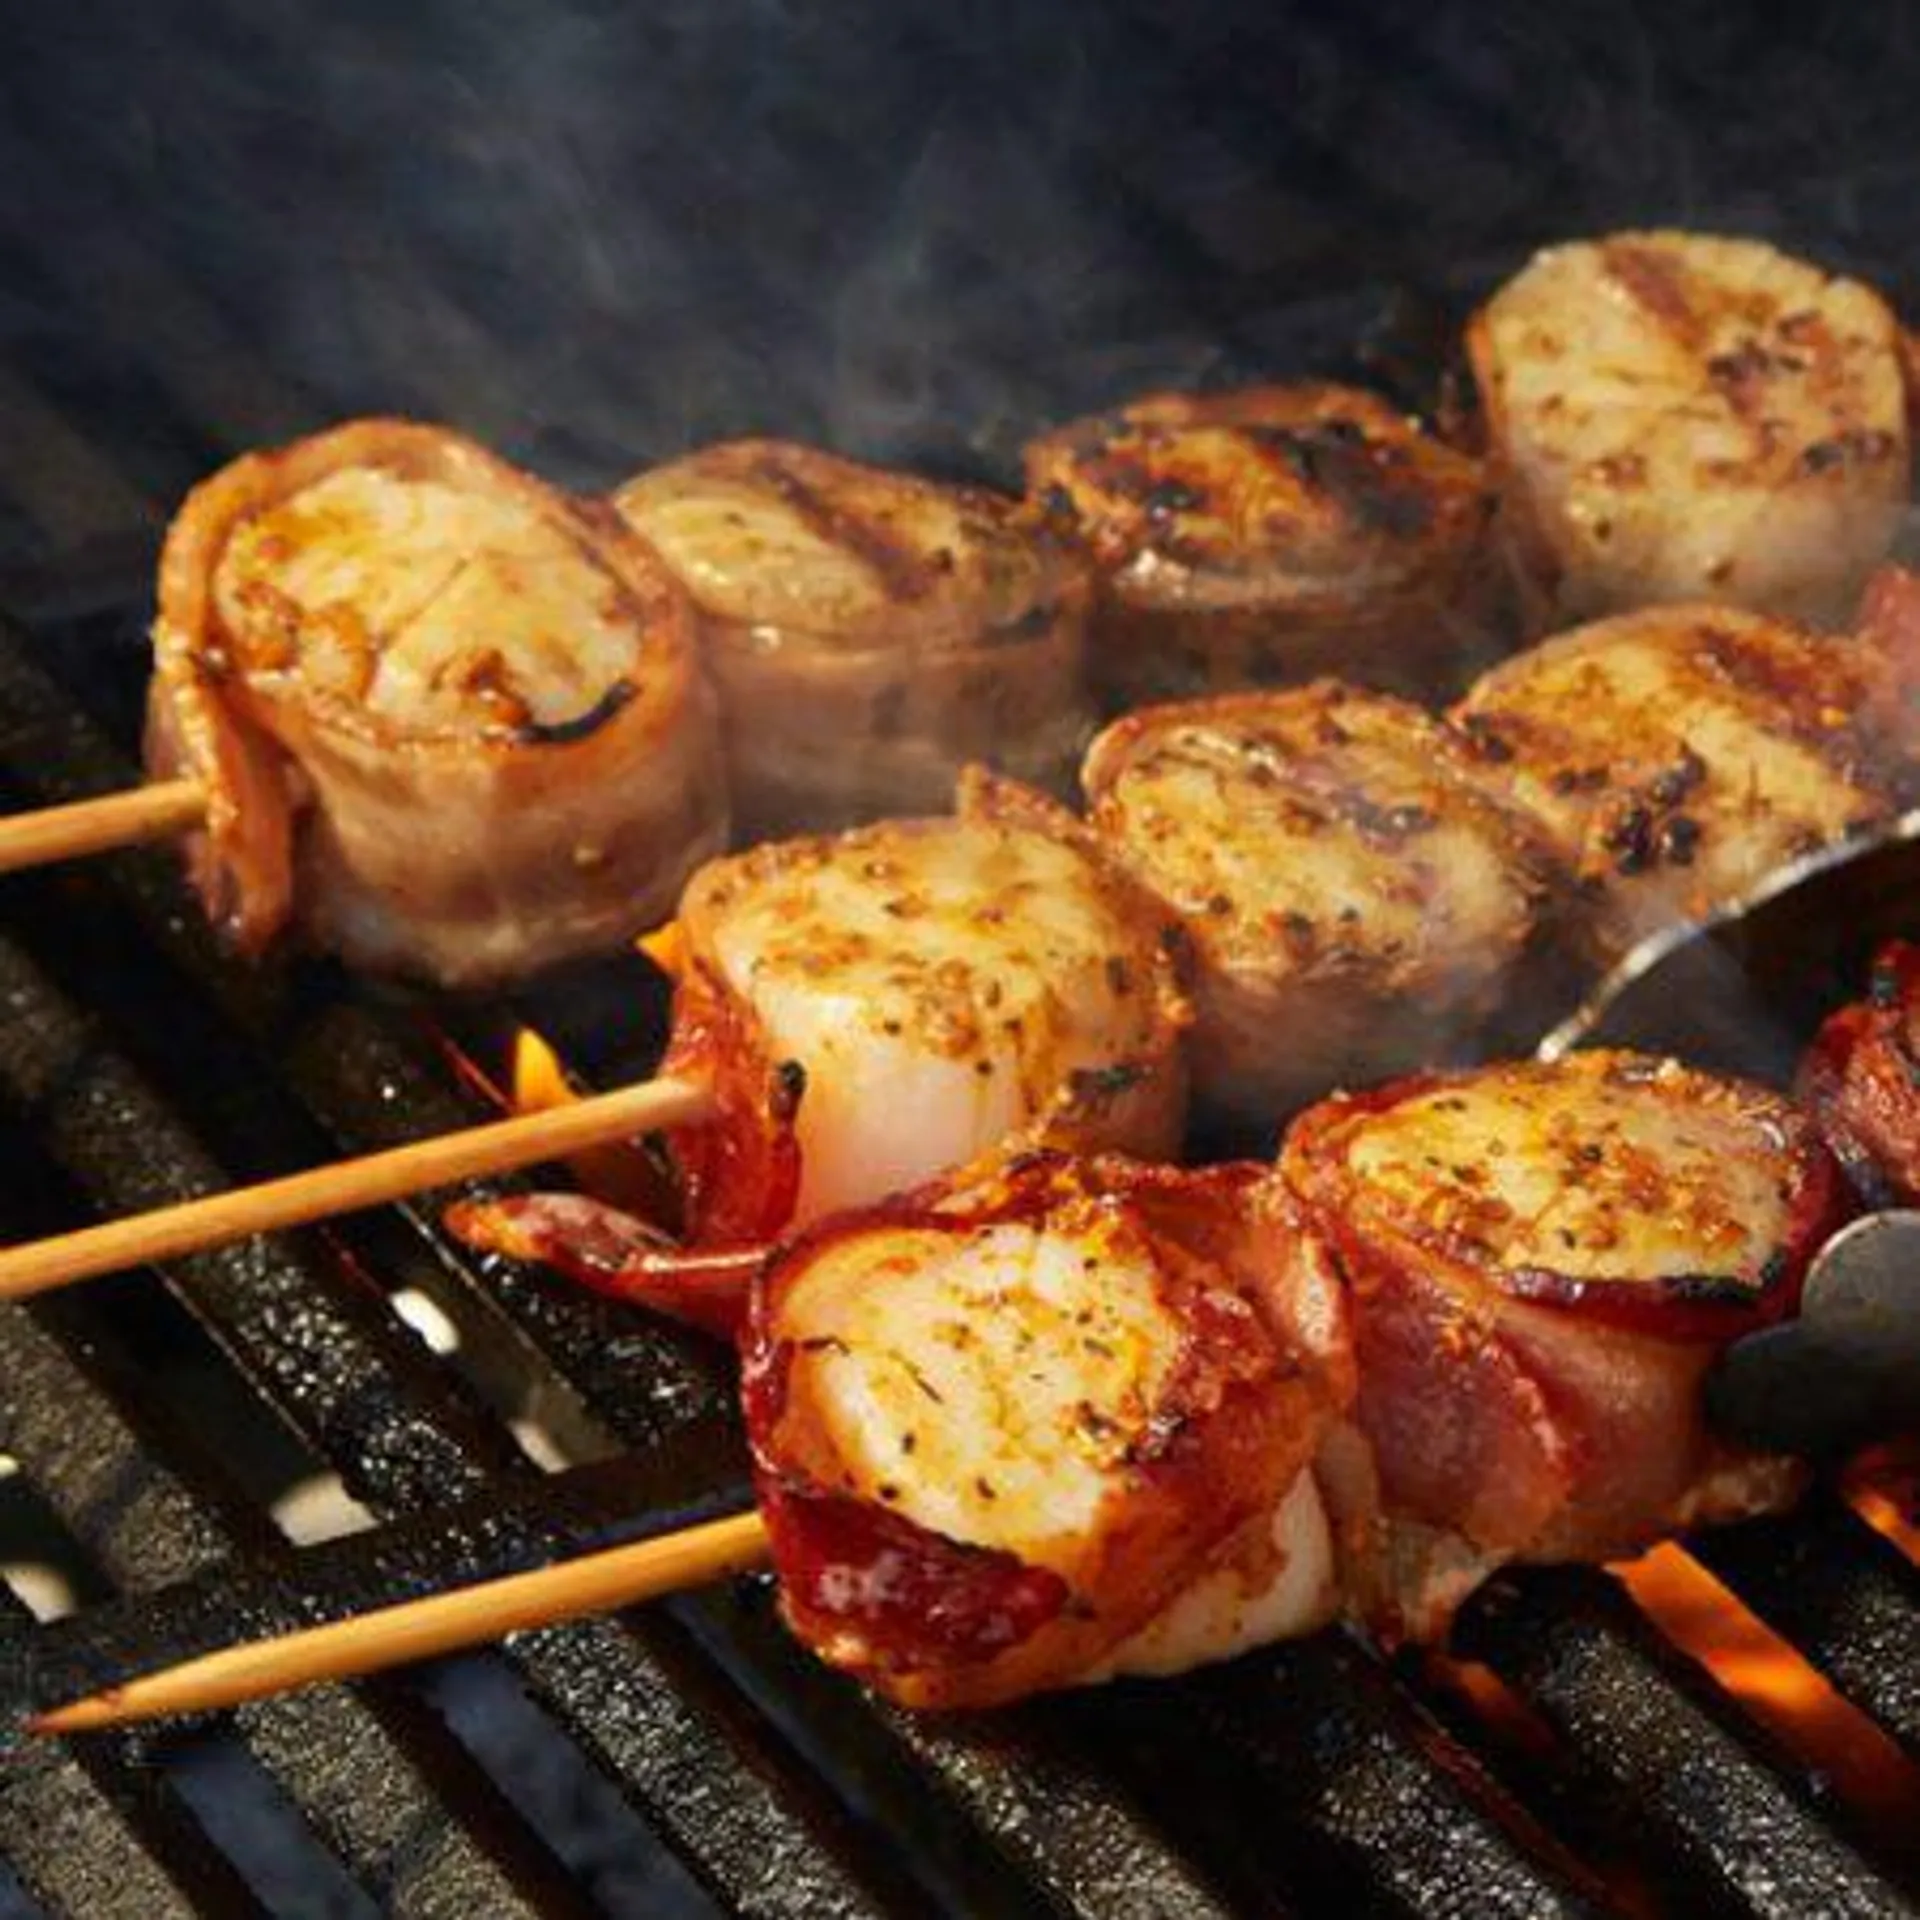 BACON WRAPPED SCALLOP SKEWER